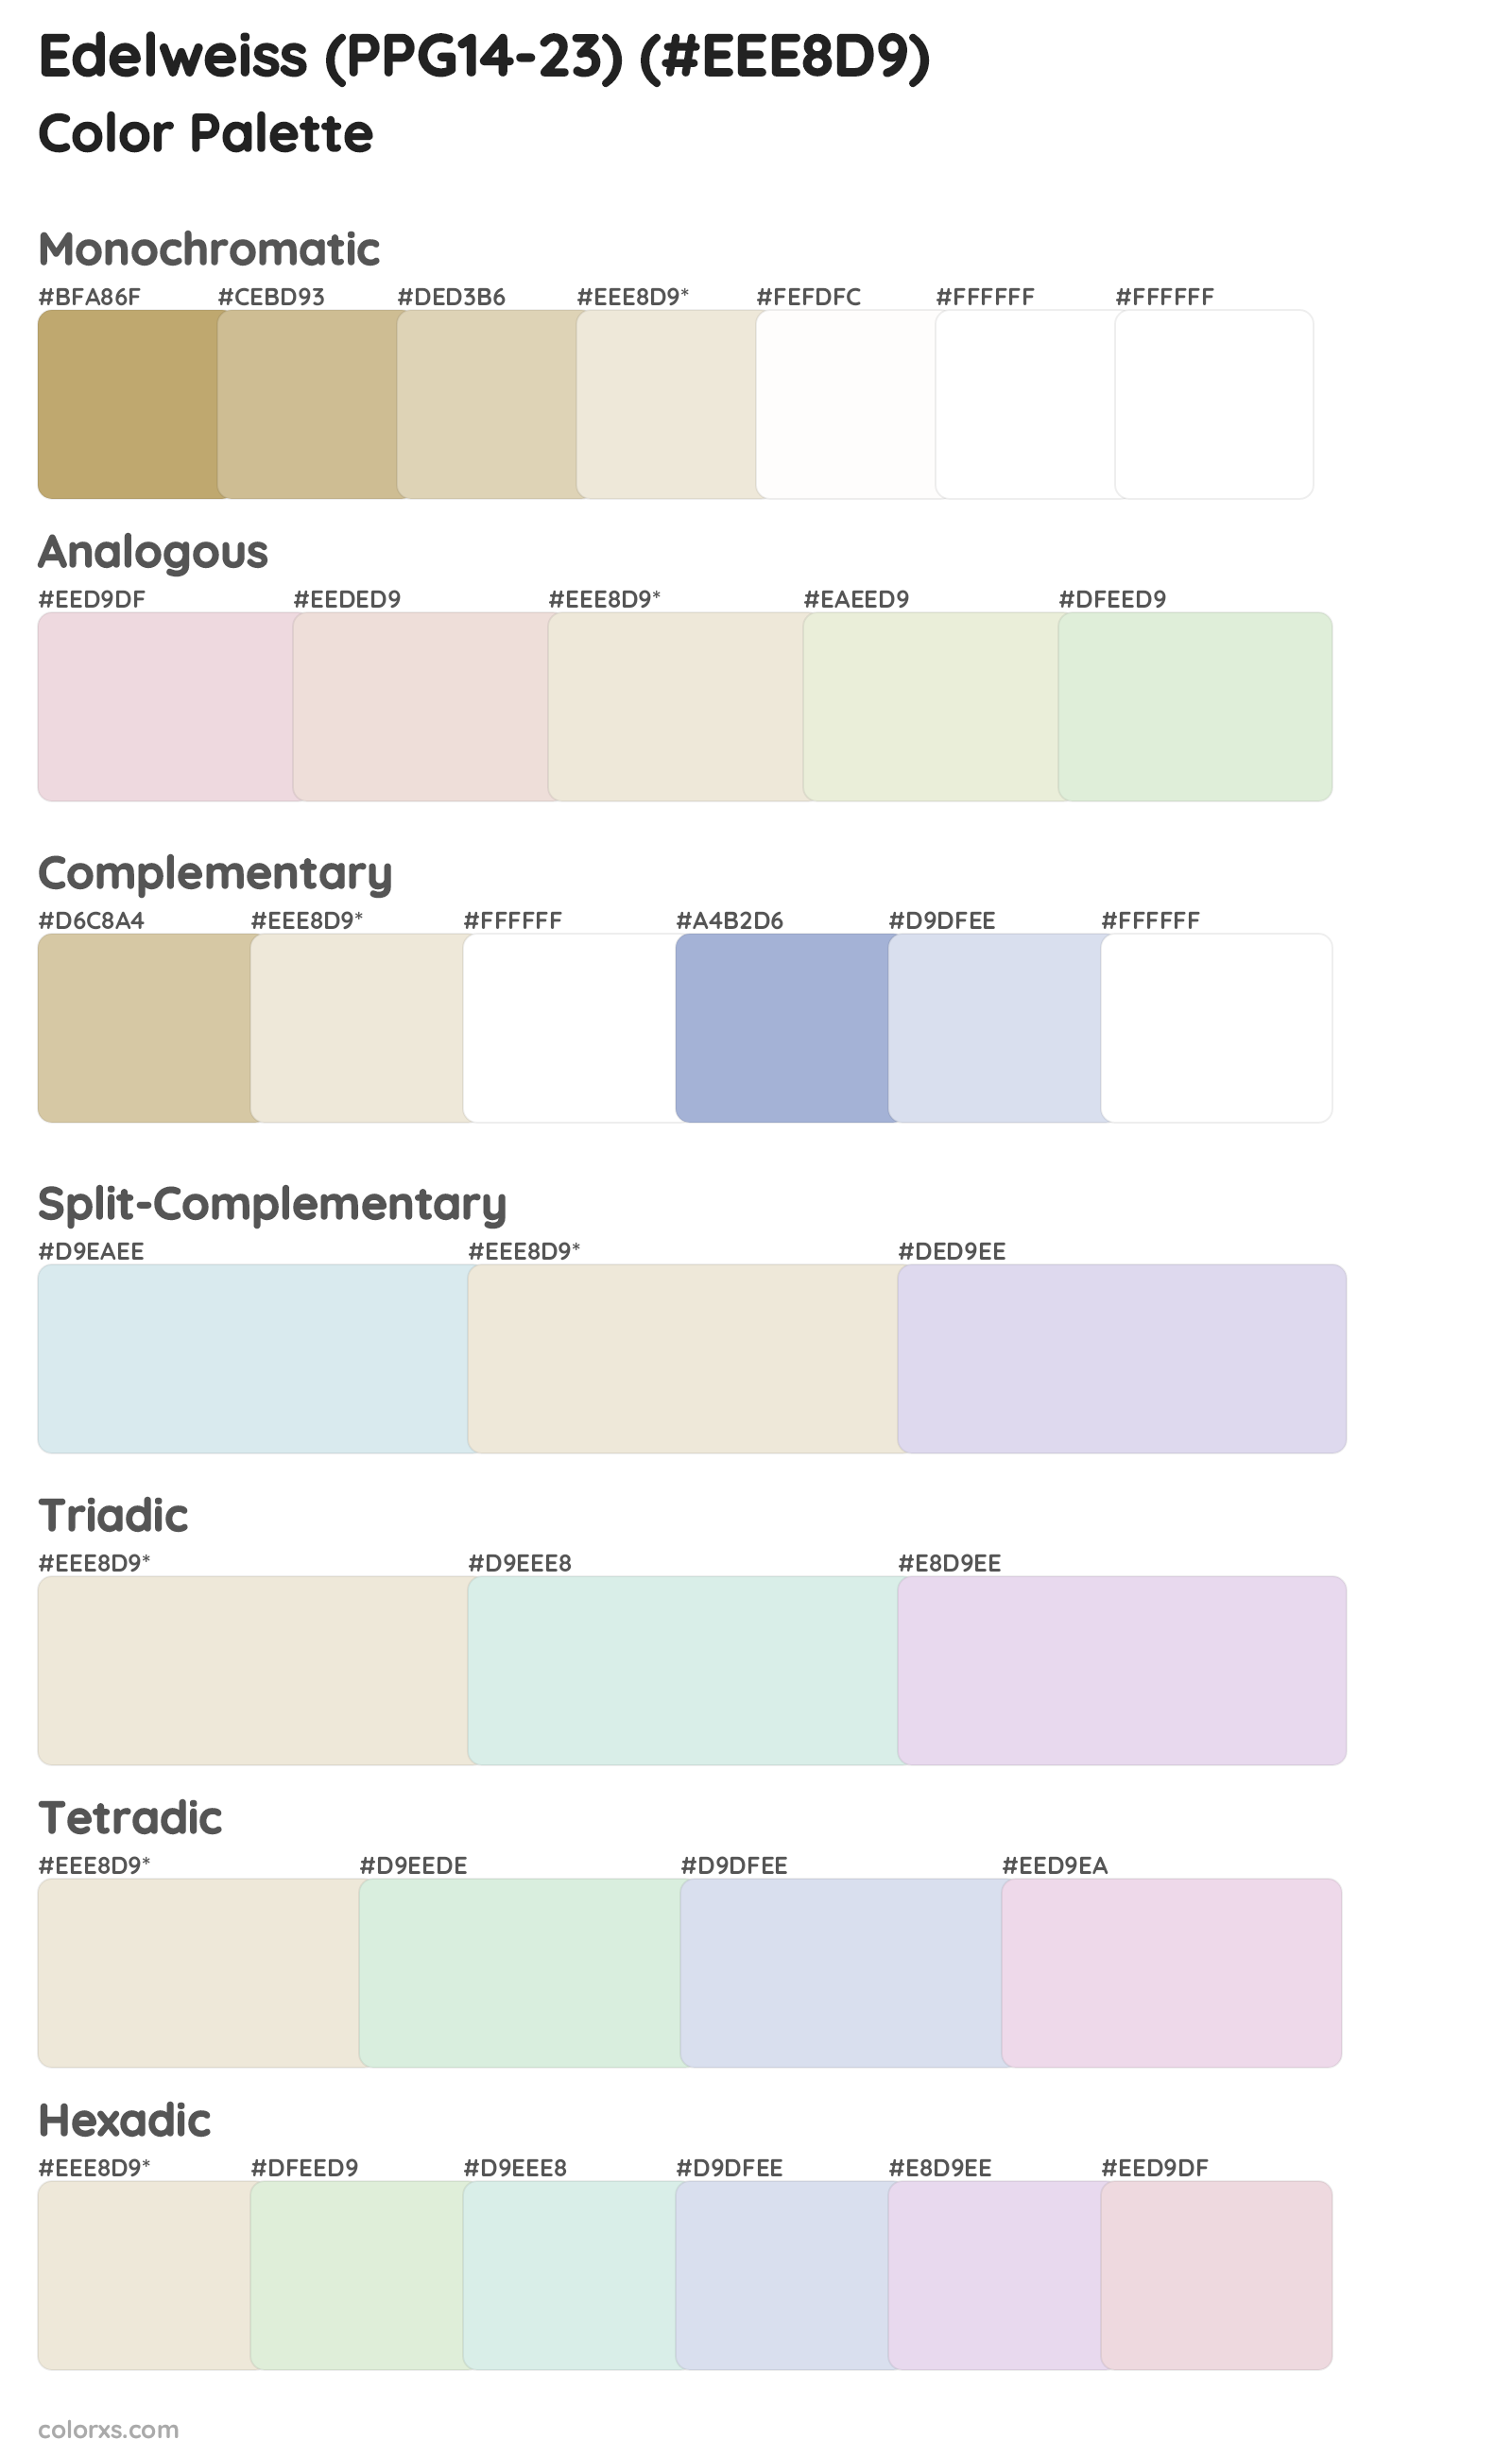 Edelweiss (PPG14-23) Color Scheme Palettes